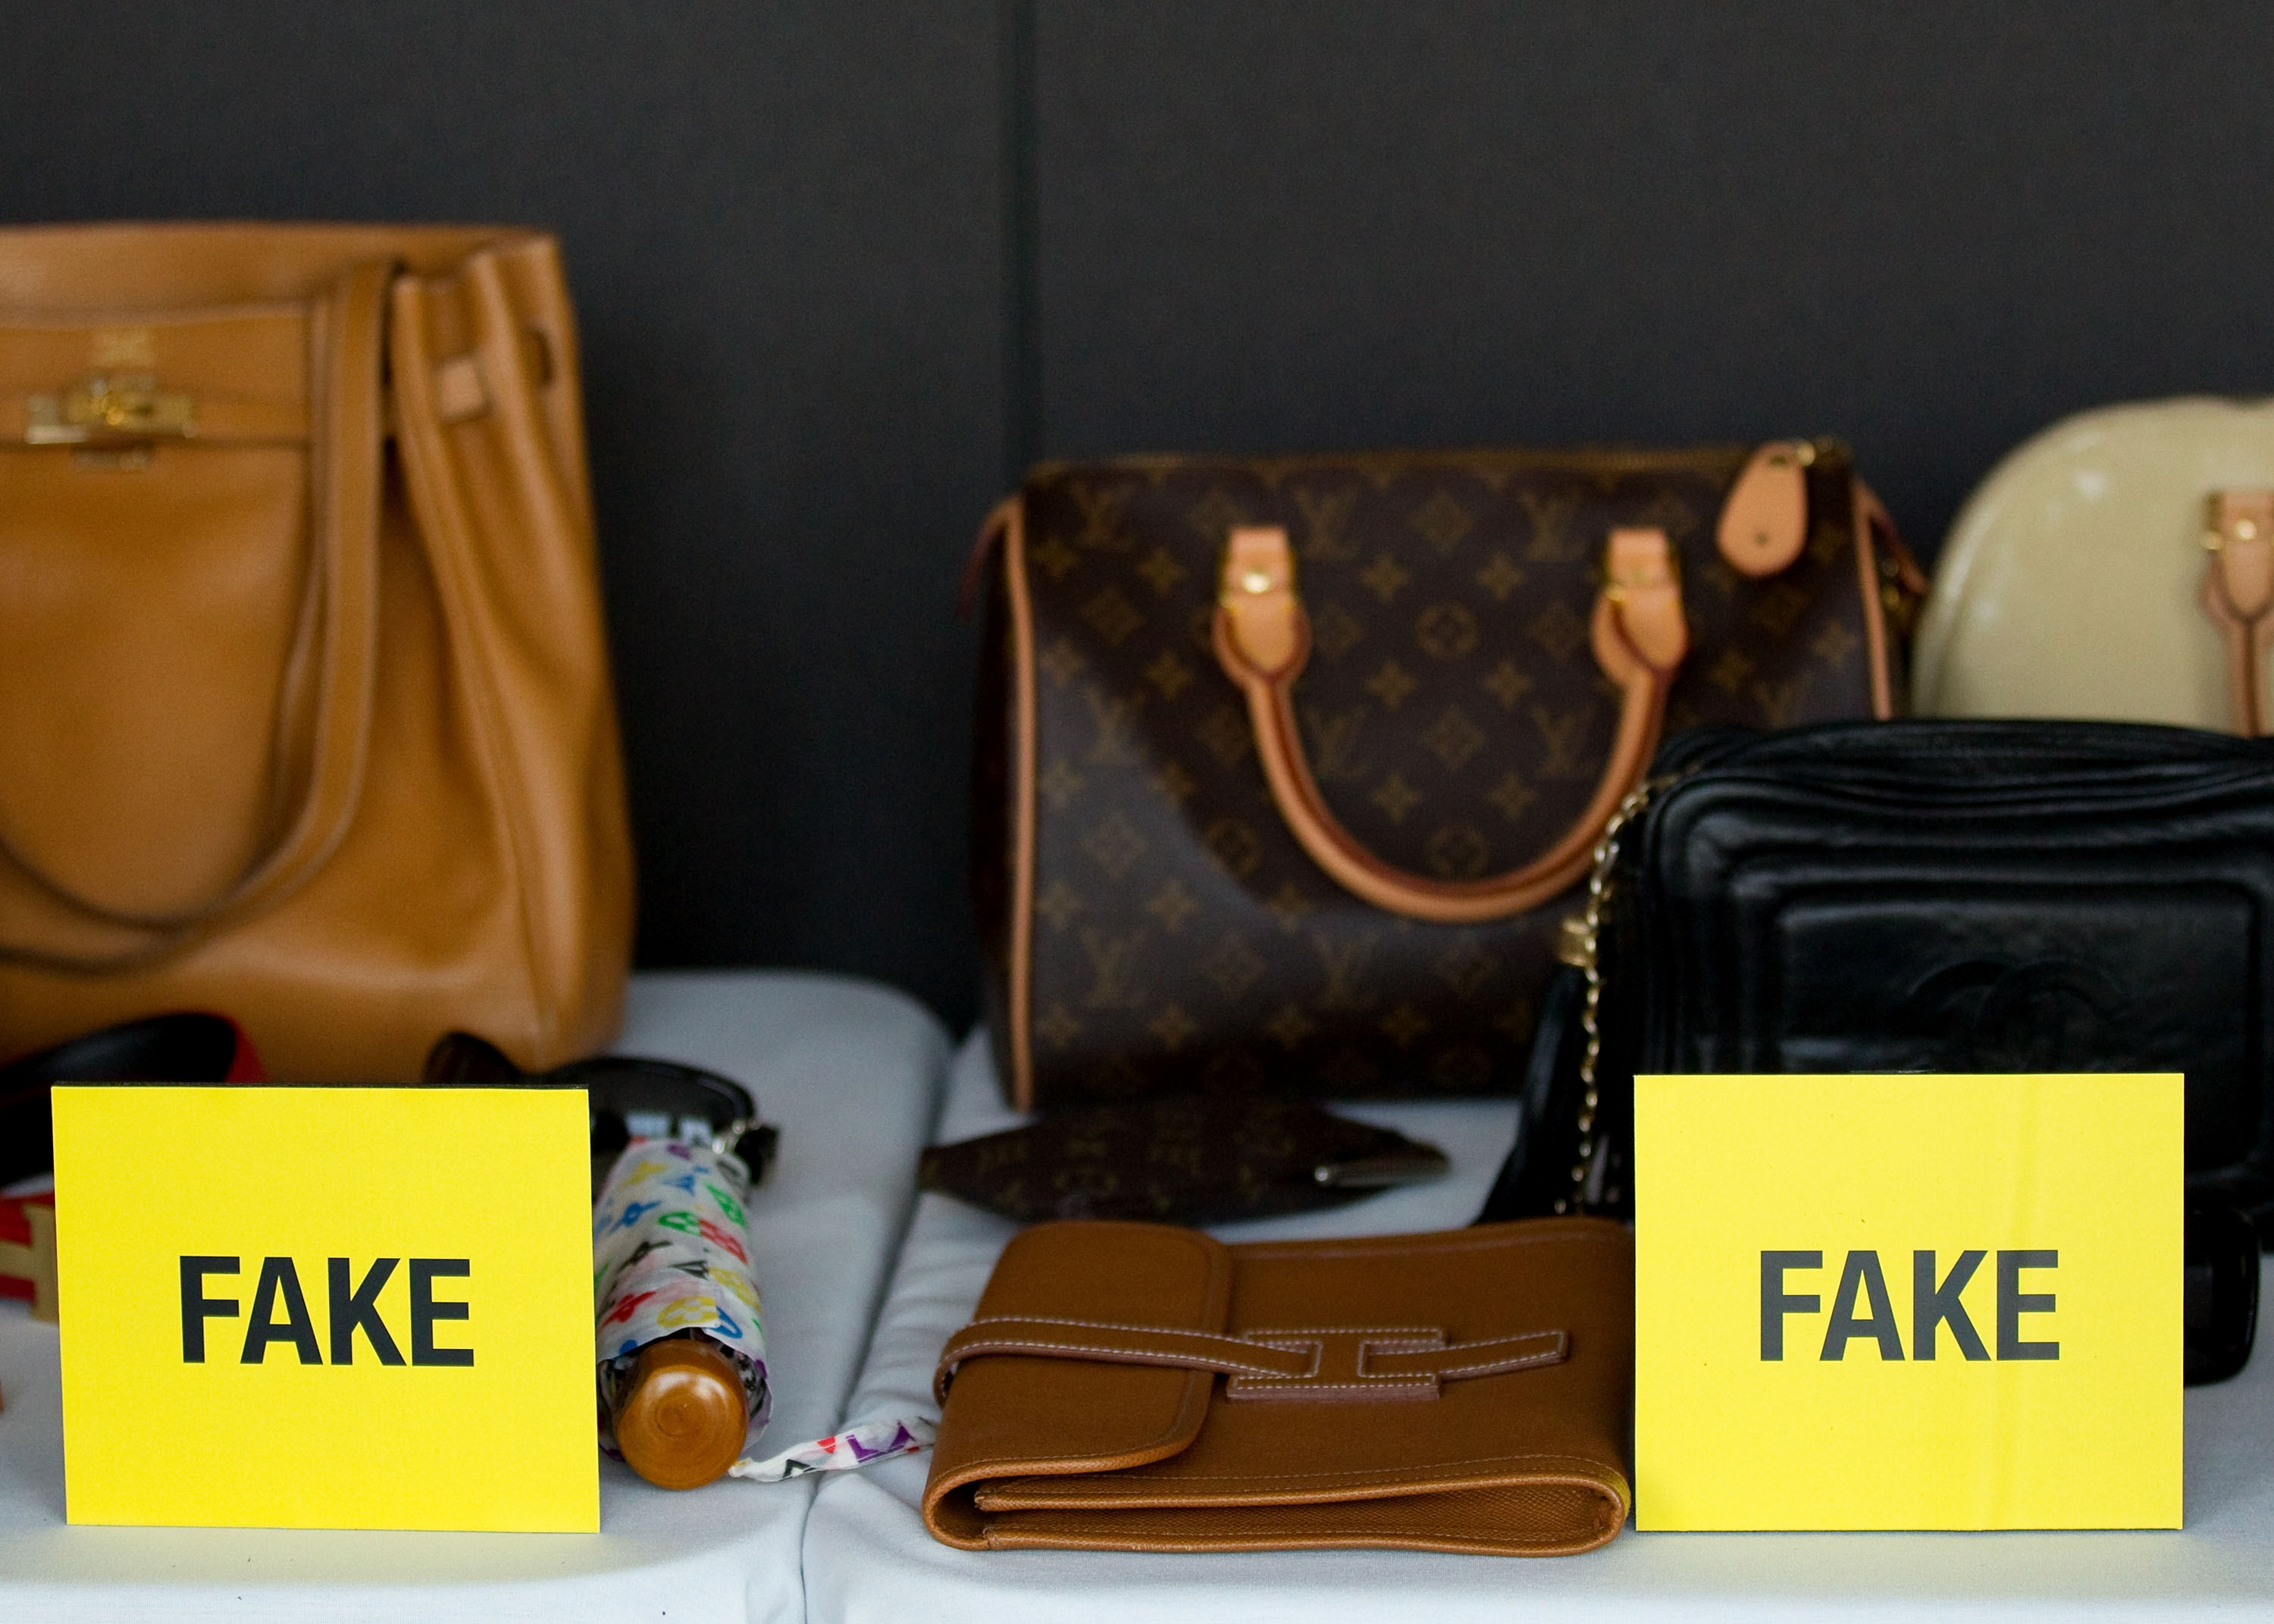 Louis Vuitton accused of selling low-quality products after